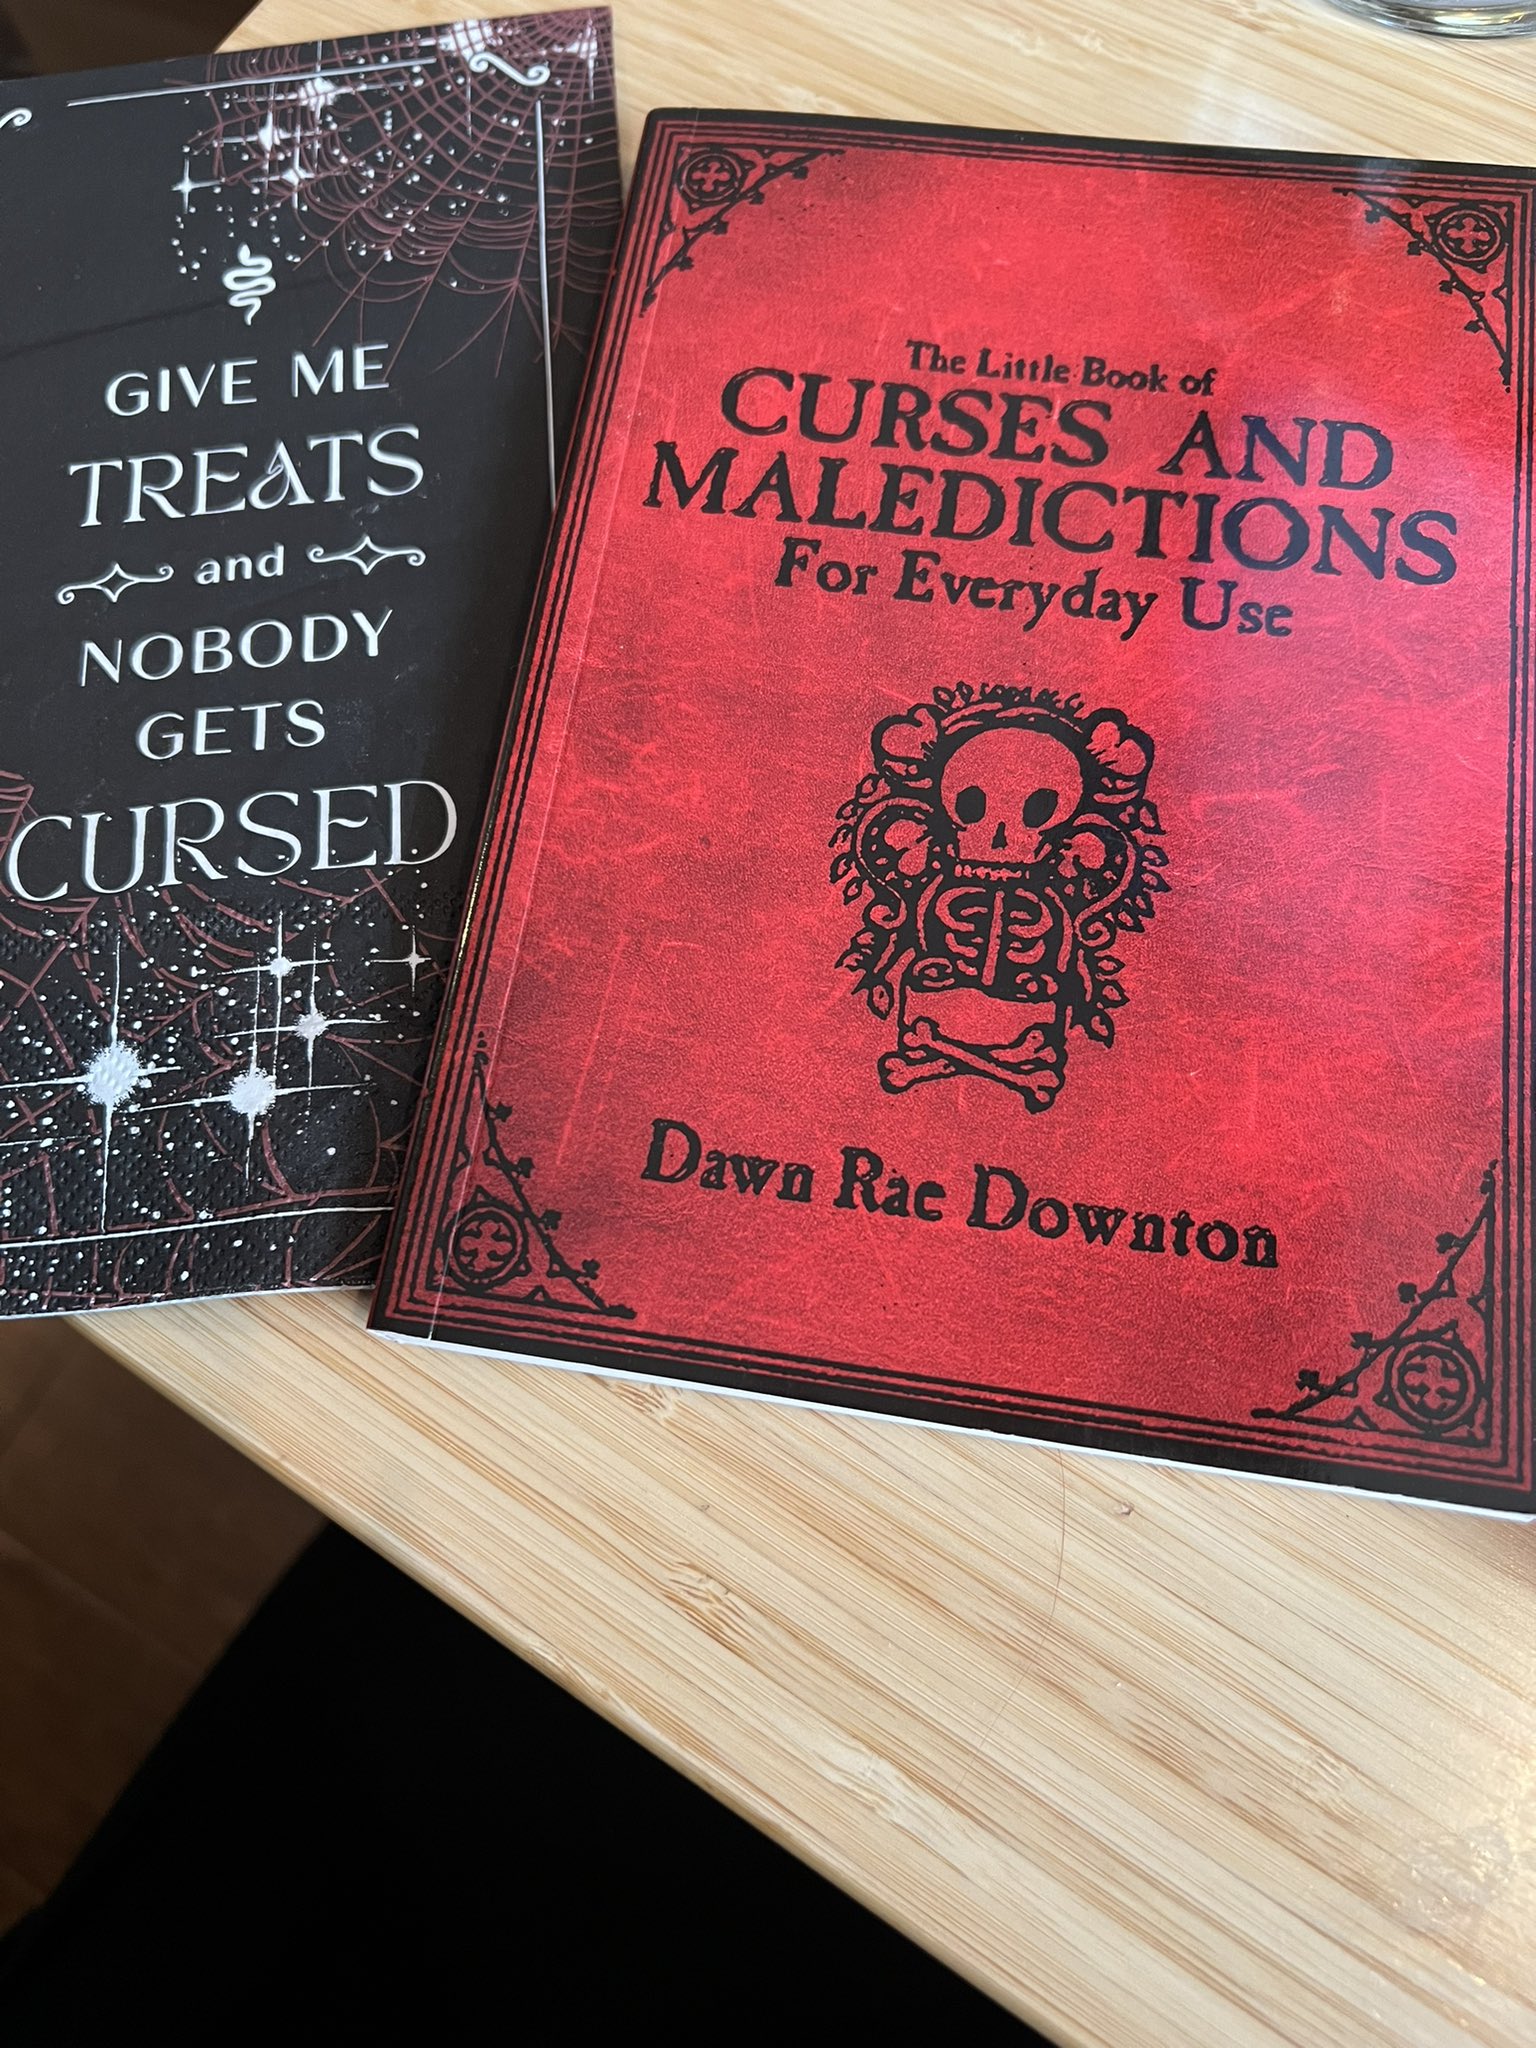 The Little Book of Curses and Maledictions for Everyday Use by